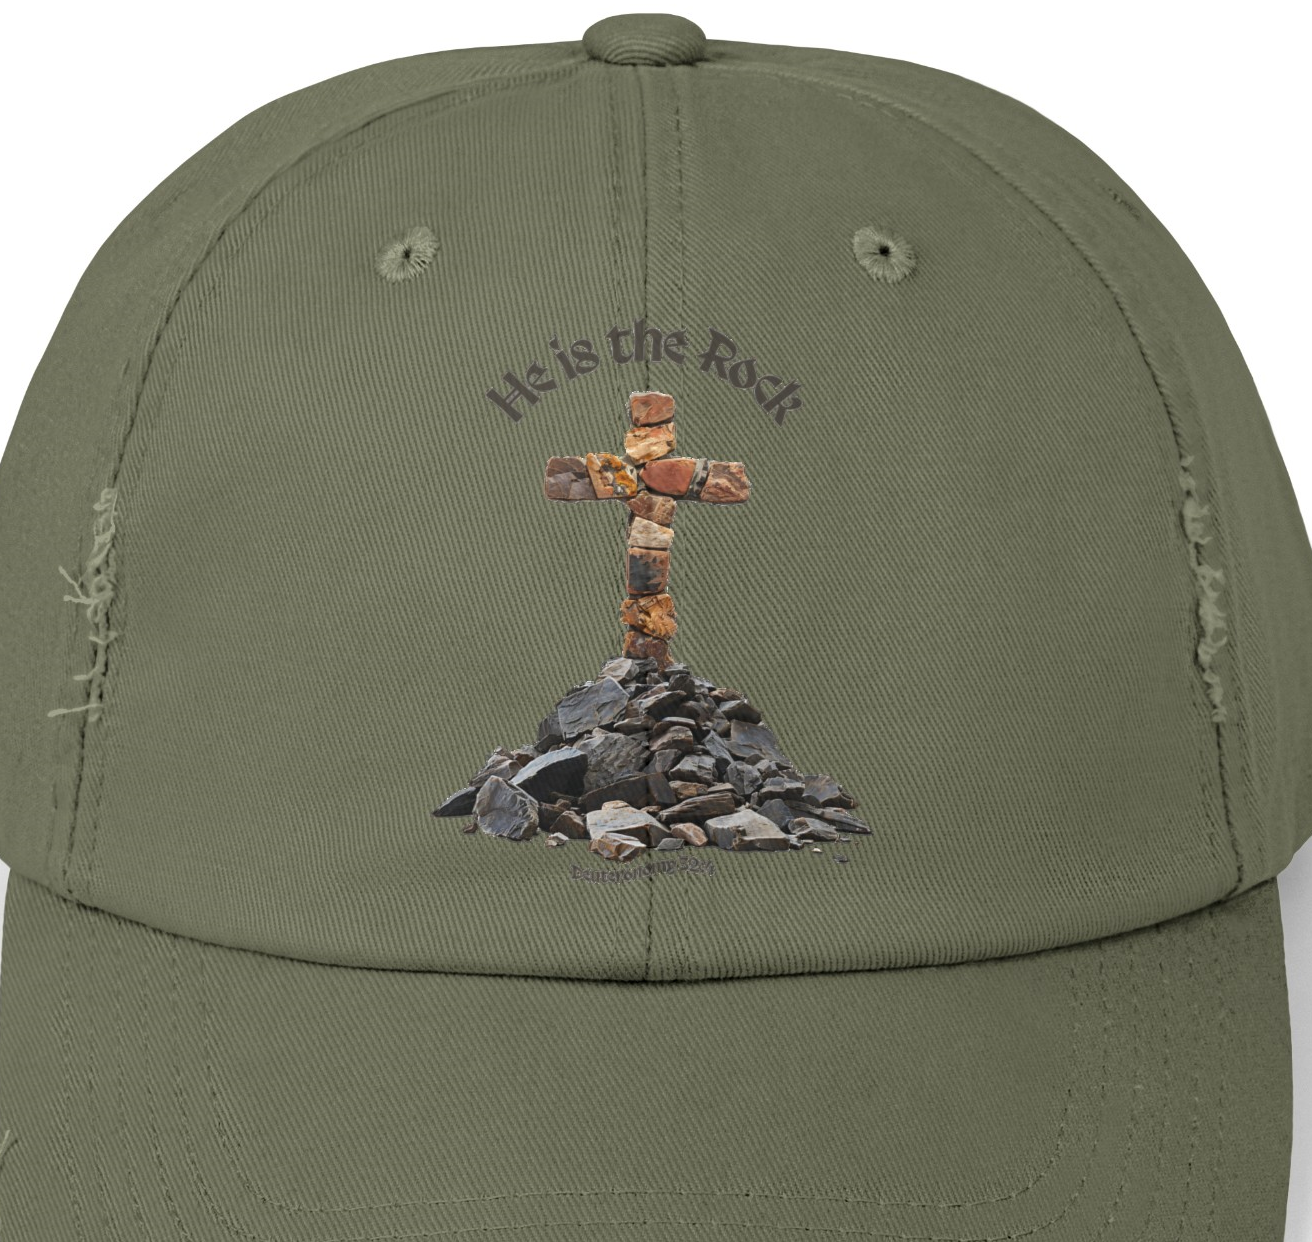 Distressed Cotton Cap with Crucifix Image and Bible Verse, 'He is the Rock' Deuteronomy 32:4, Low Profile Twill Hat, 3 Color Options